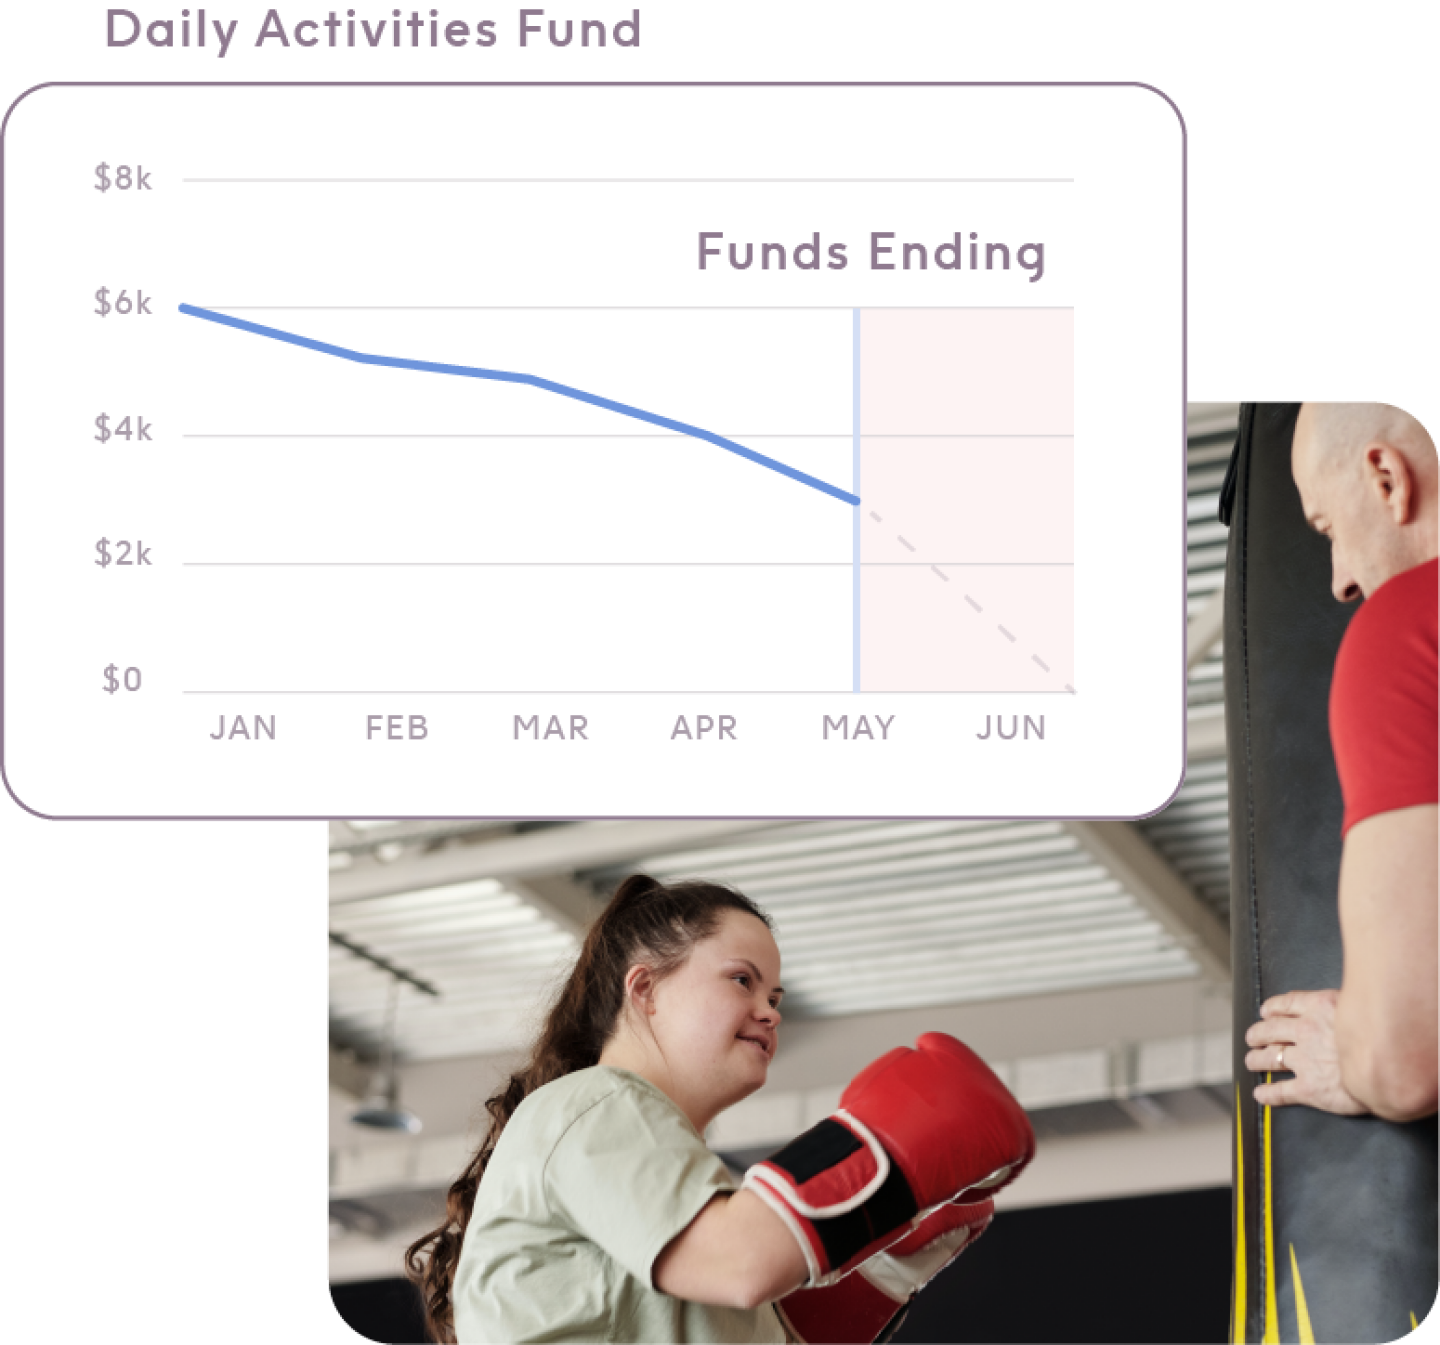 Young female client with disability boxing a punching bag alongside a graphic showing a graph of her daily activities funds ending soon